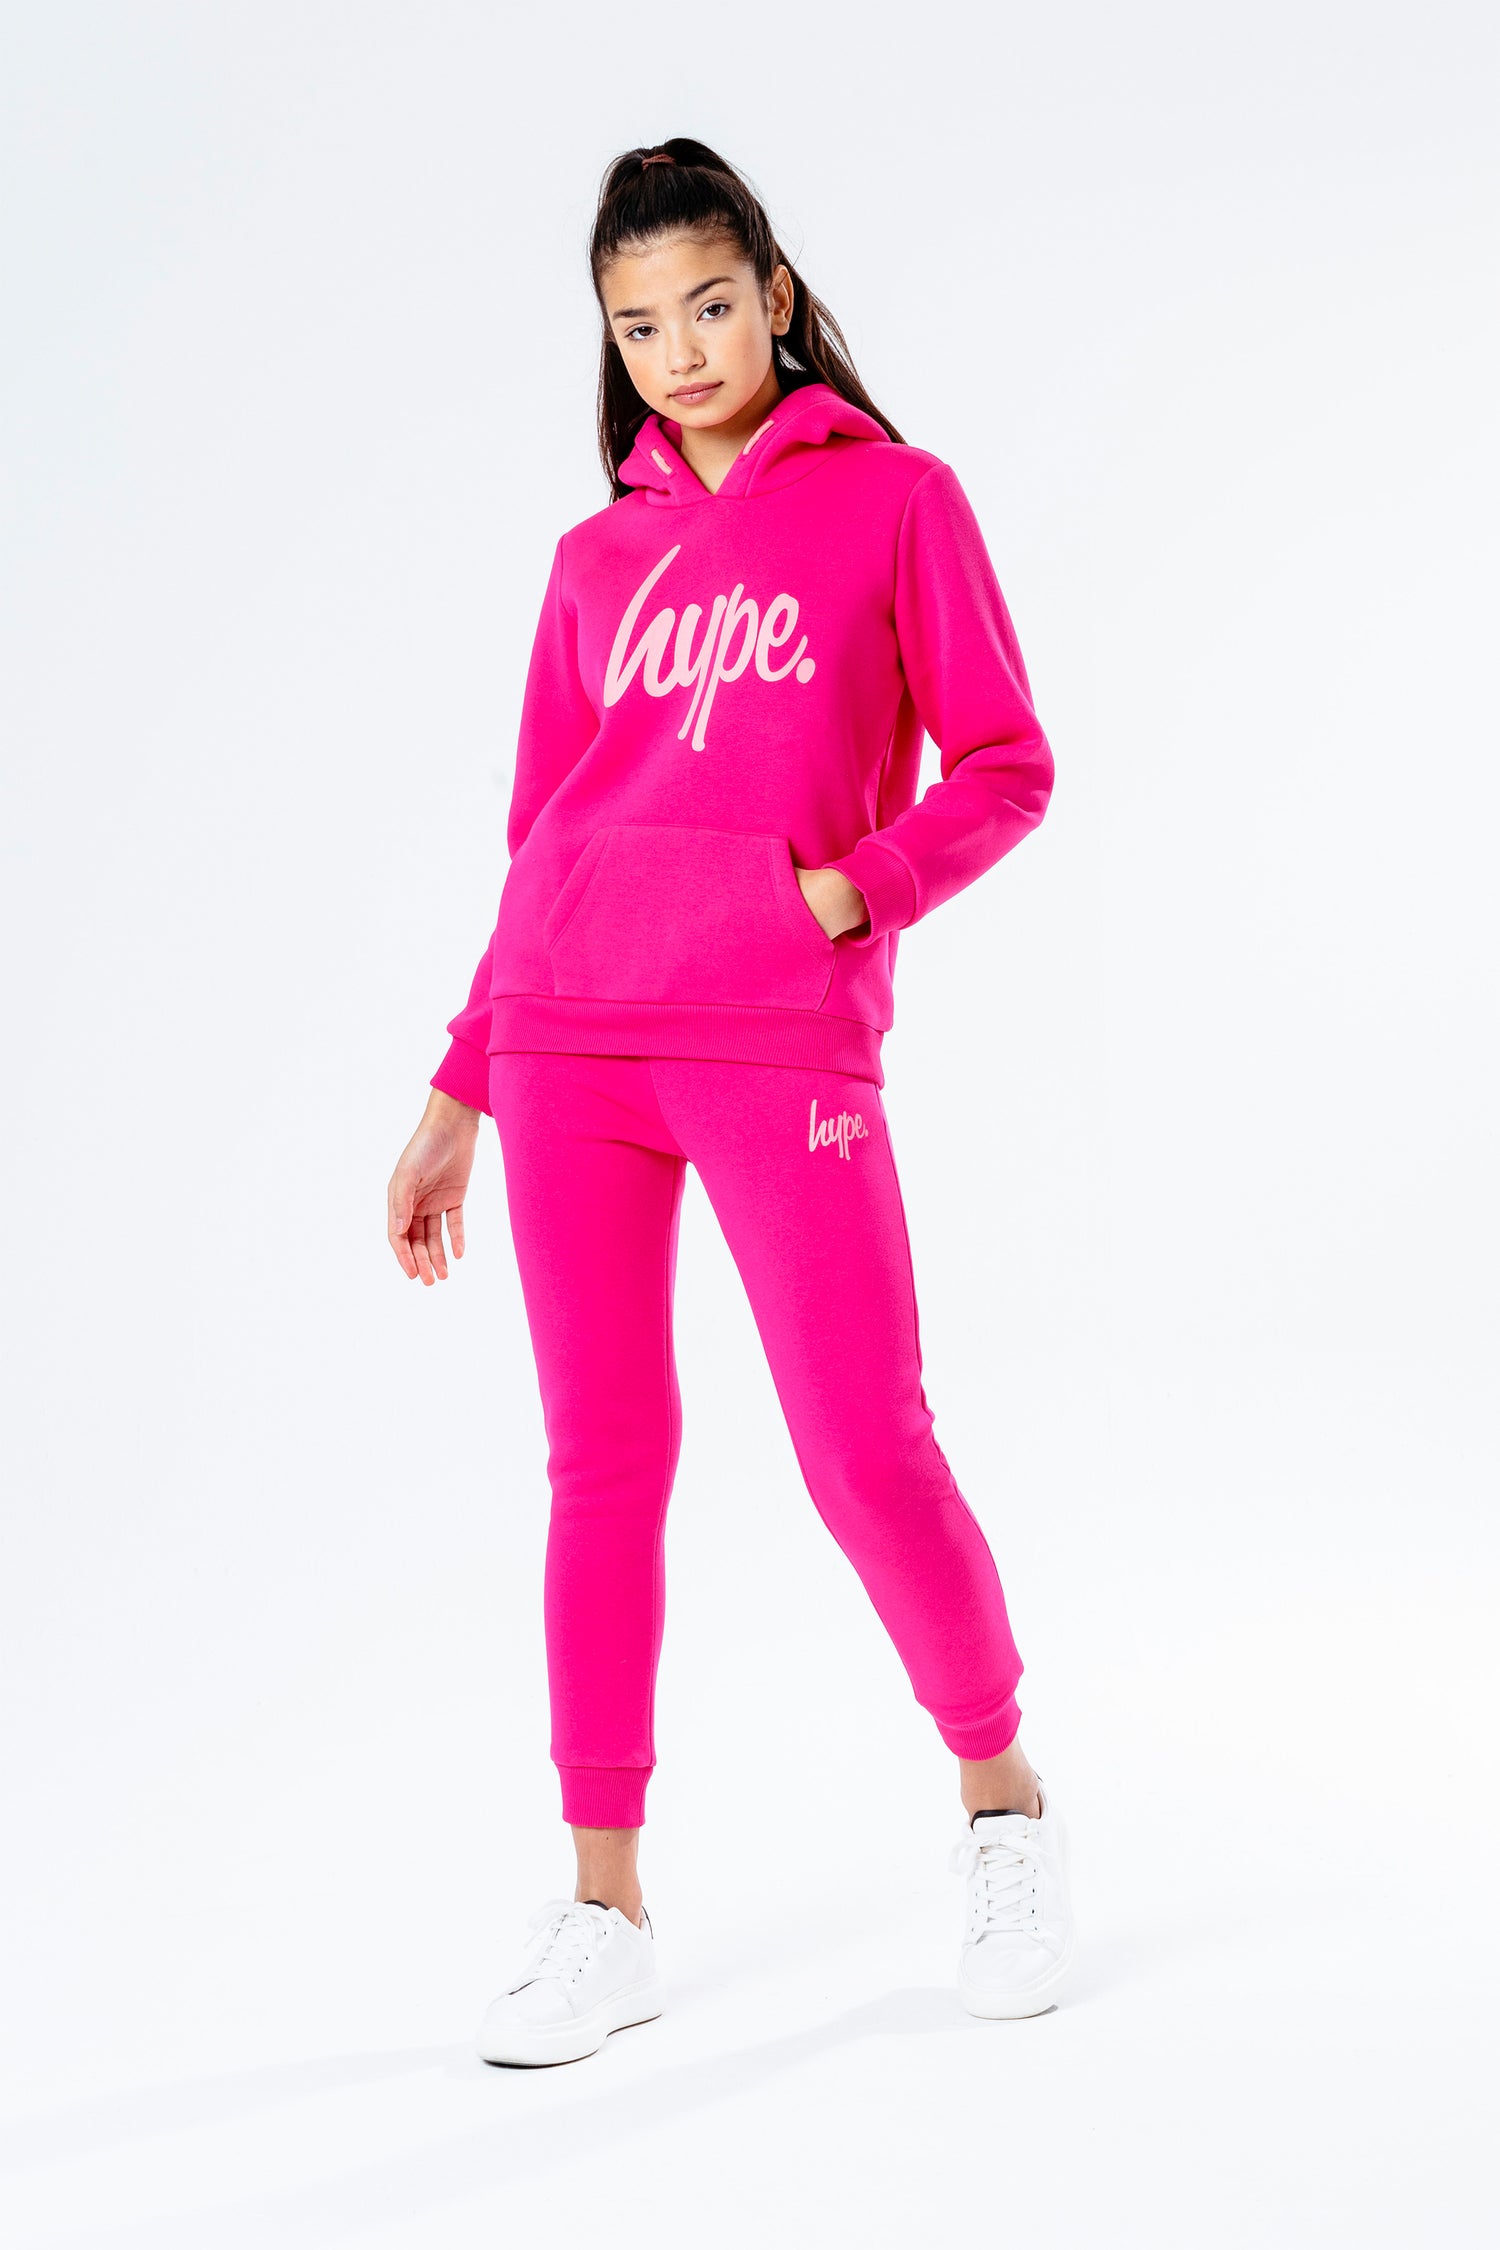 HYPE PINK SCRIPT TRACKSUIT FOR GIRLS